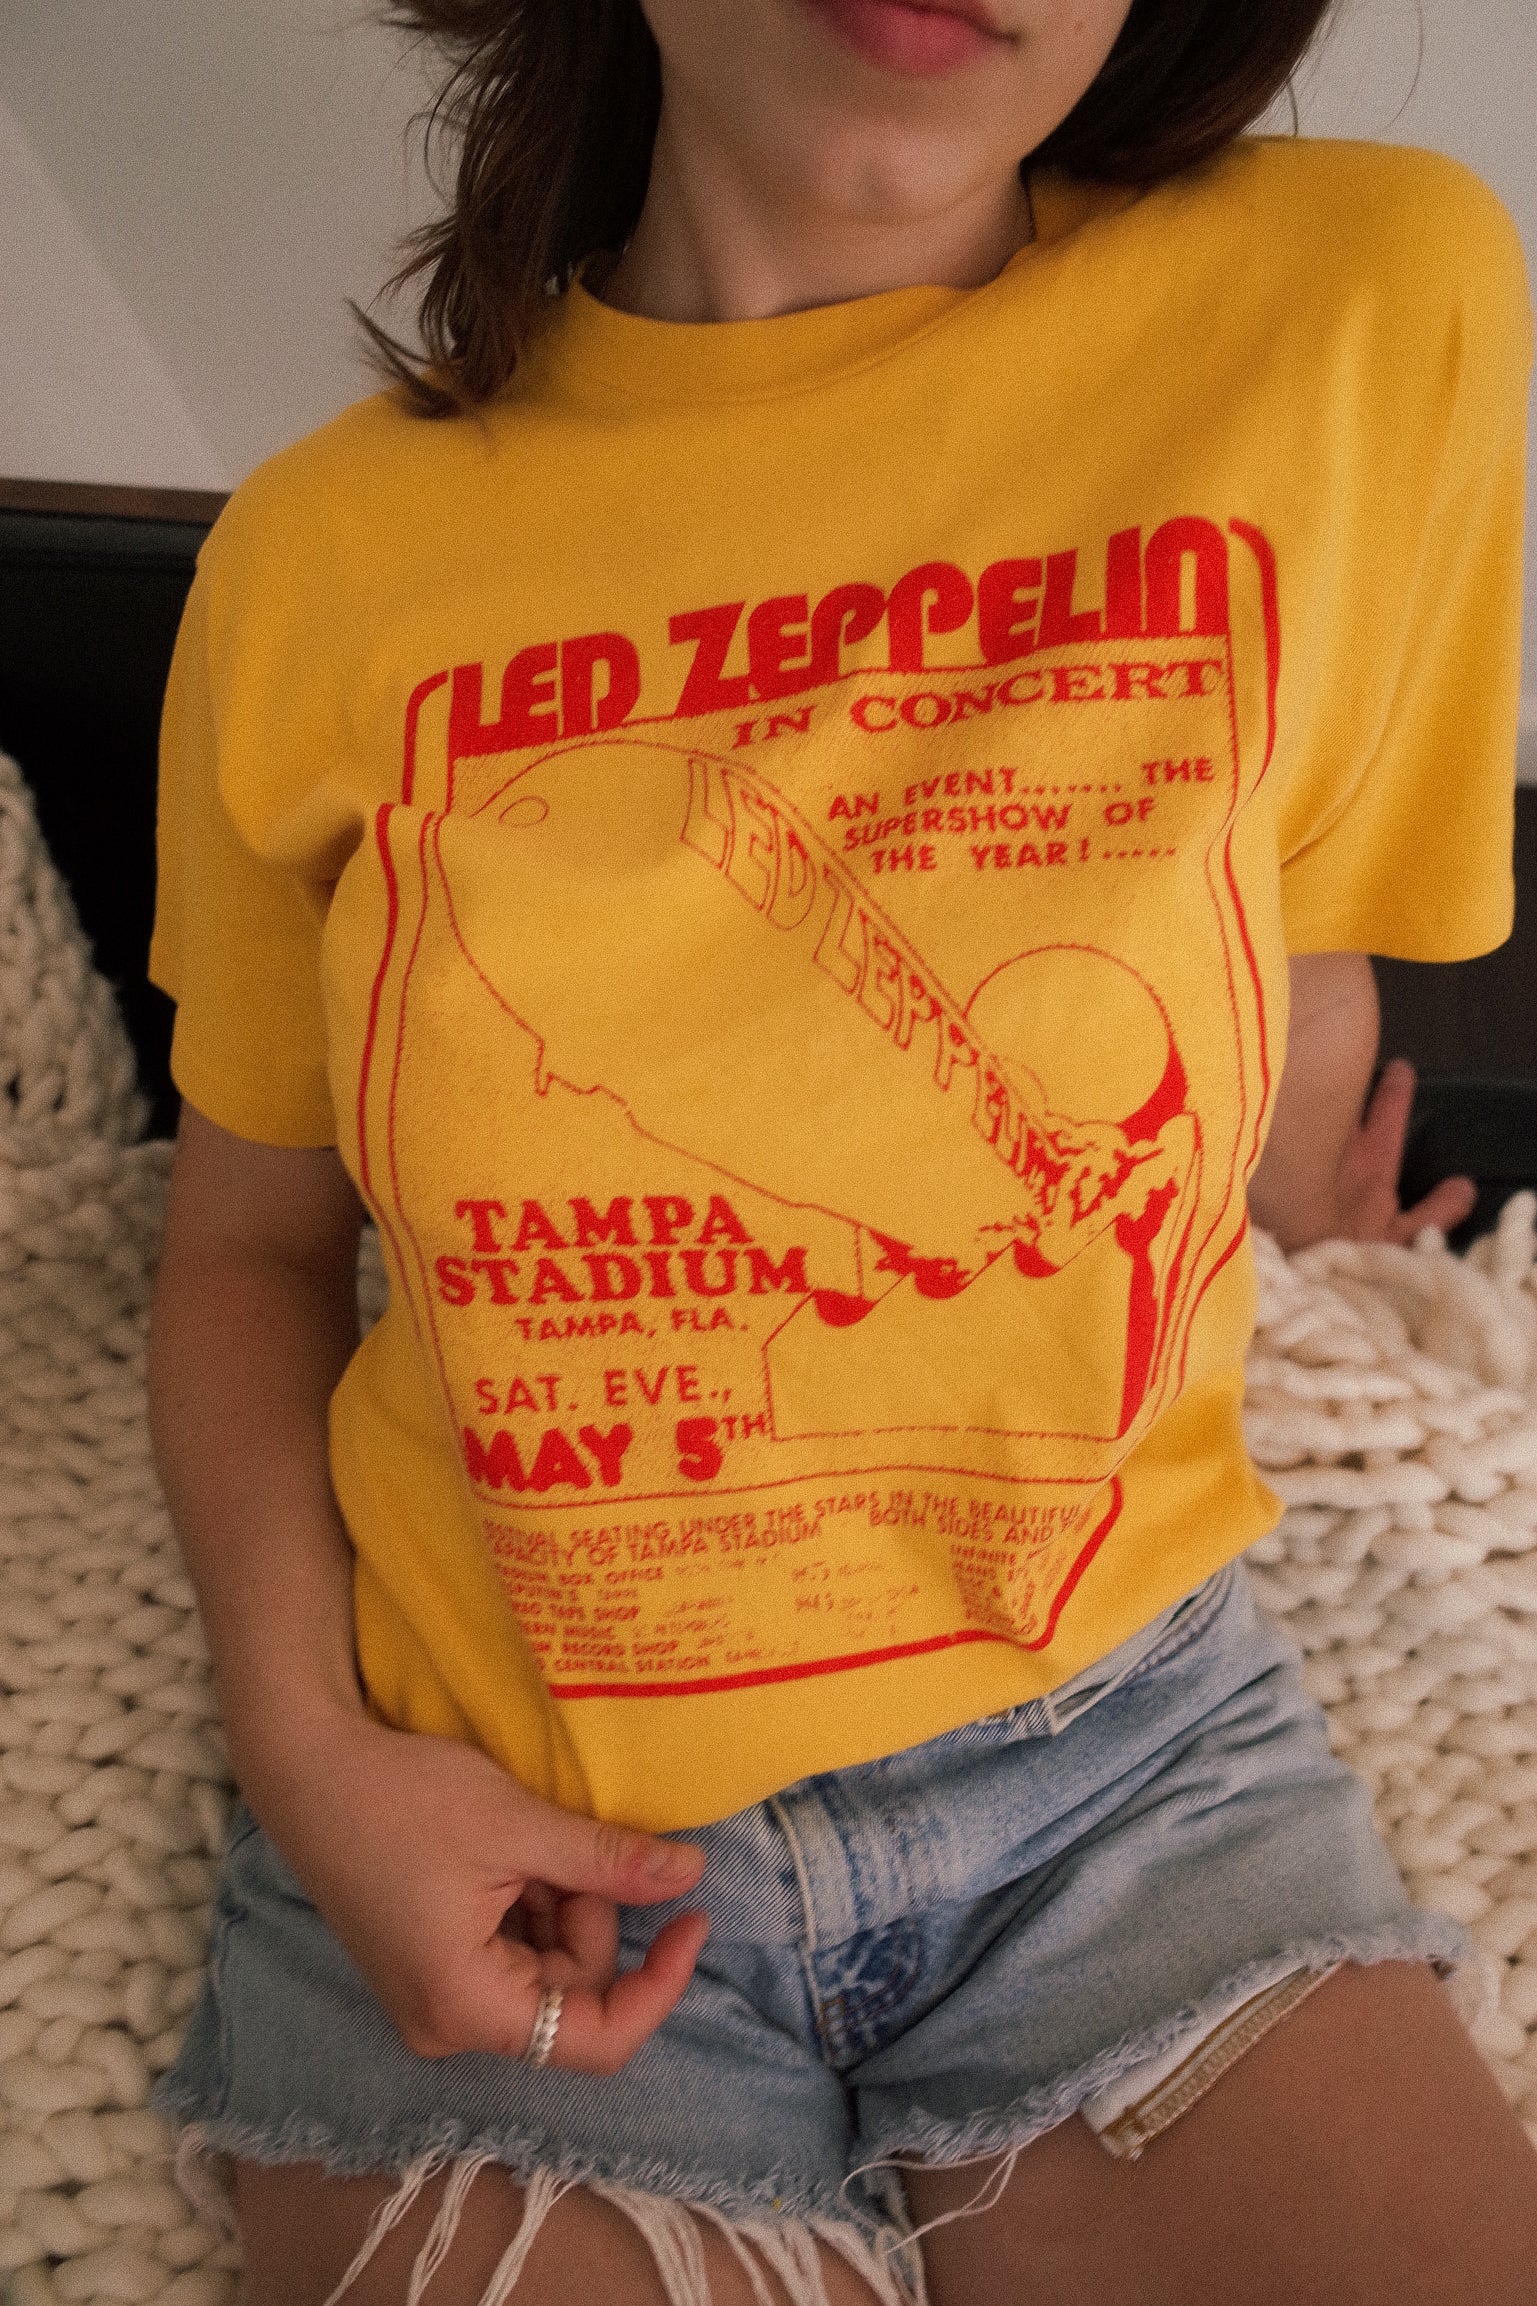 Led Zeppelin Tampa Stadium Weekend Tee - The Canyon